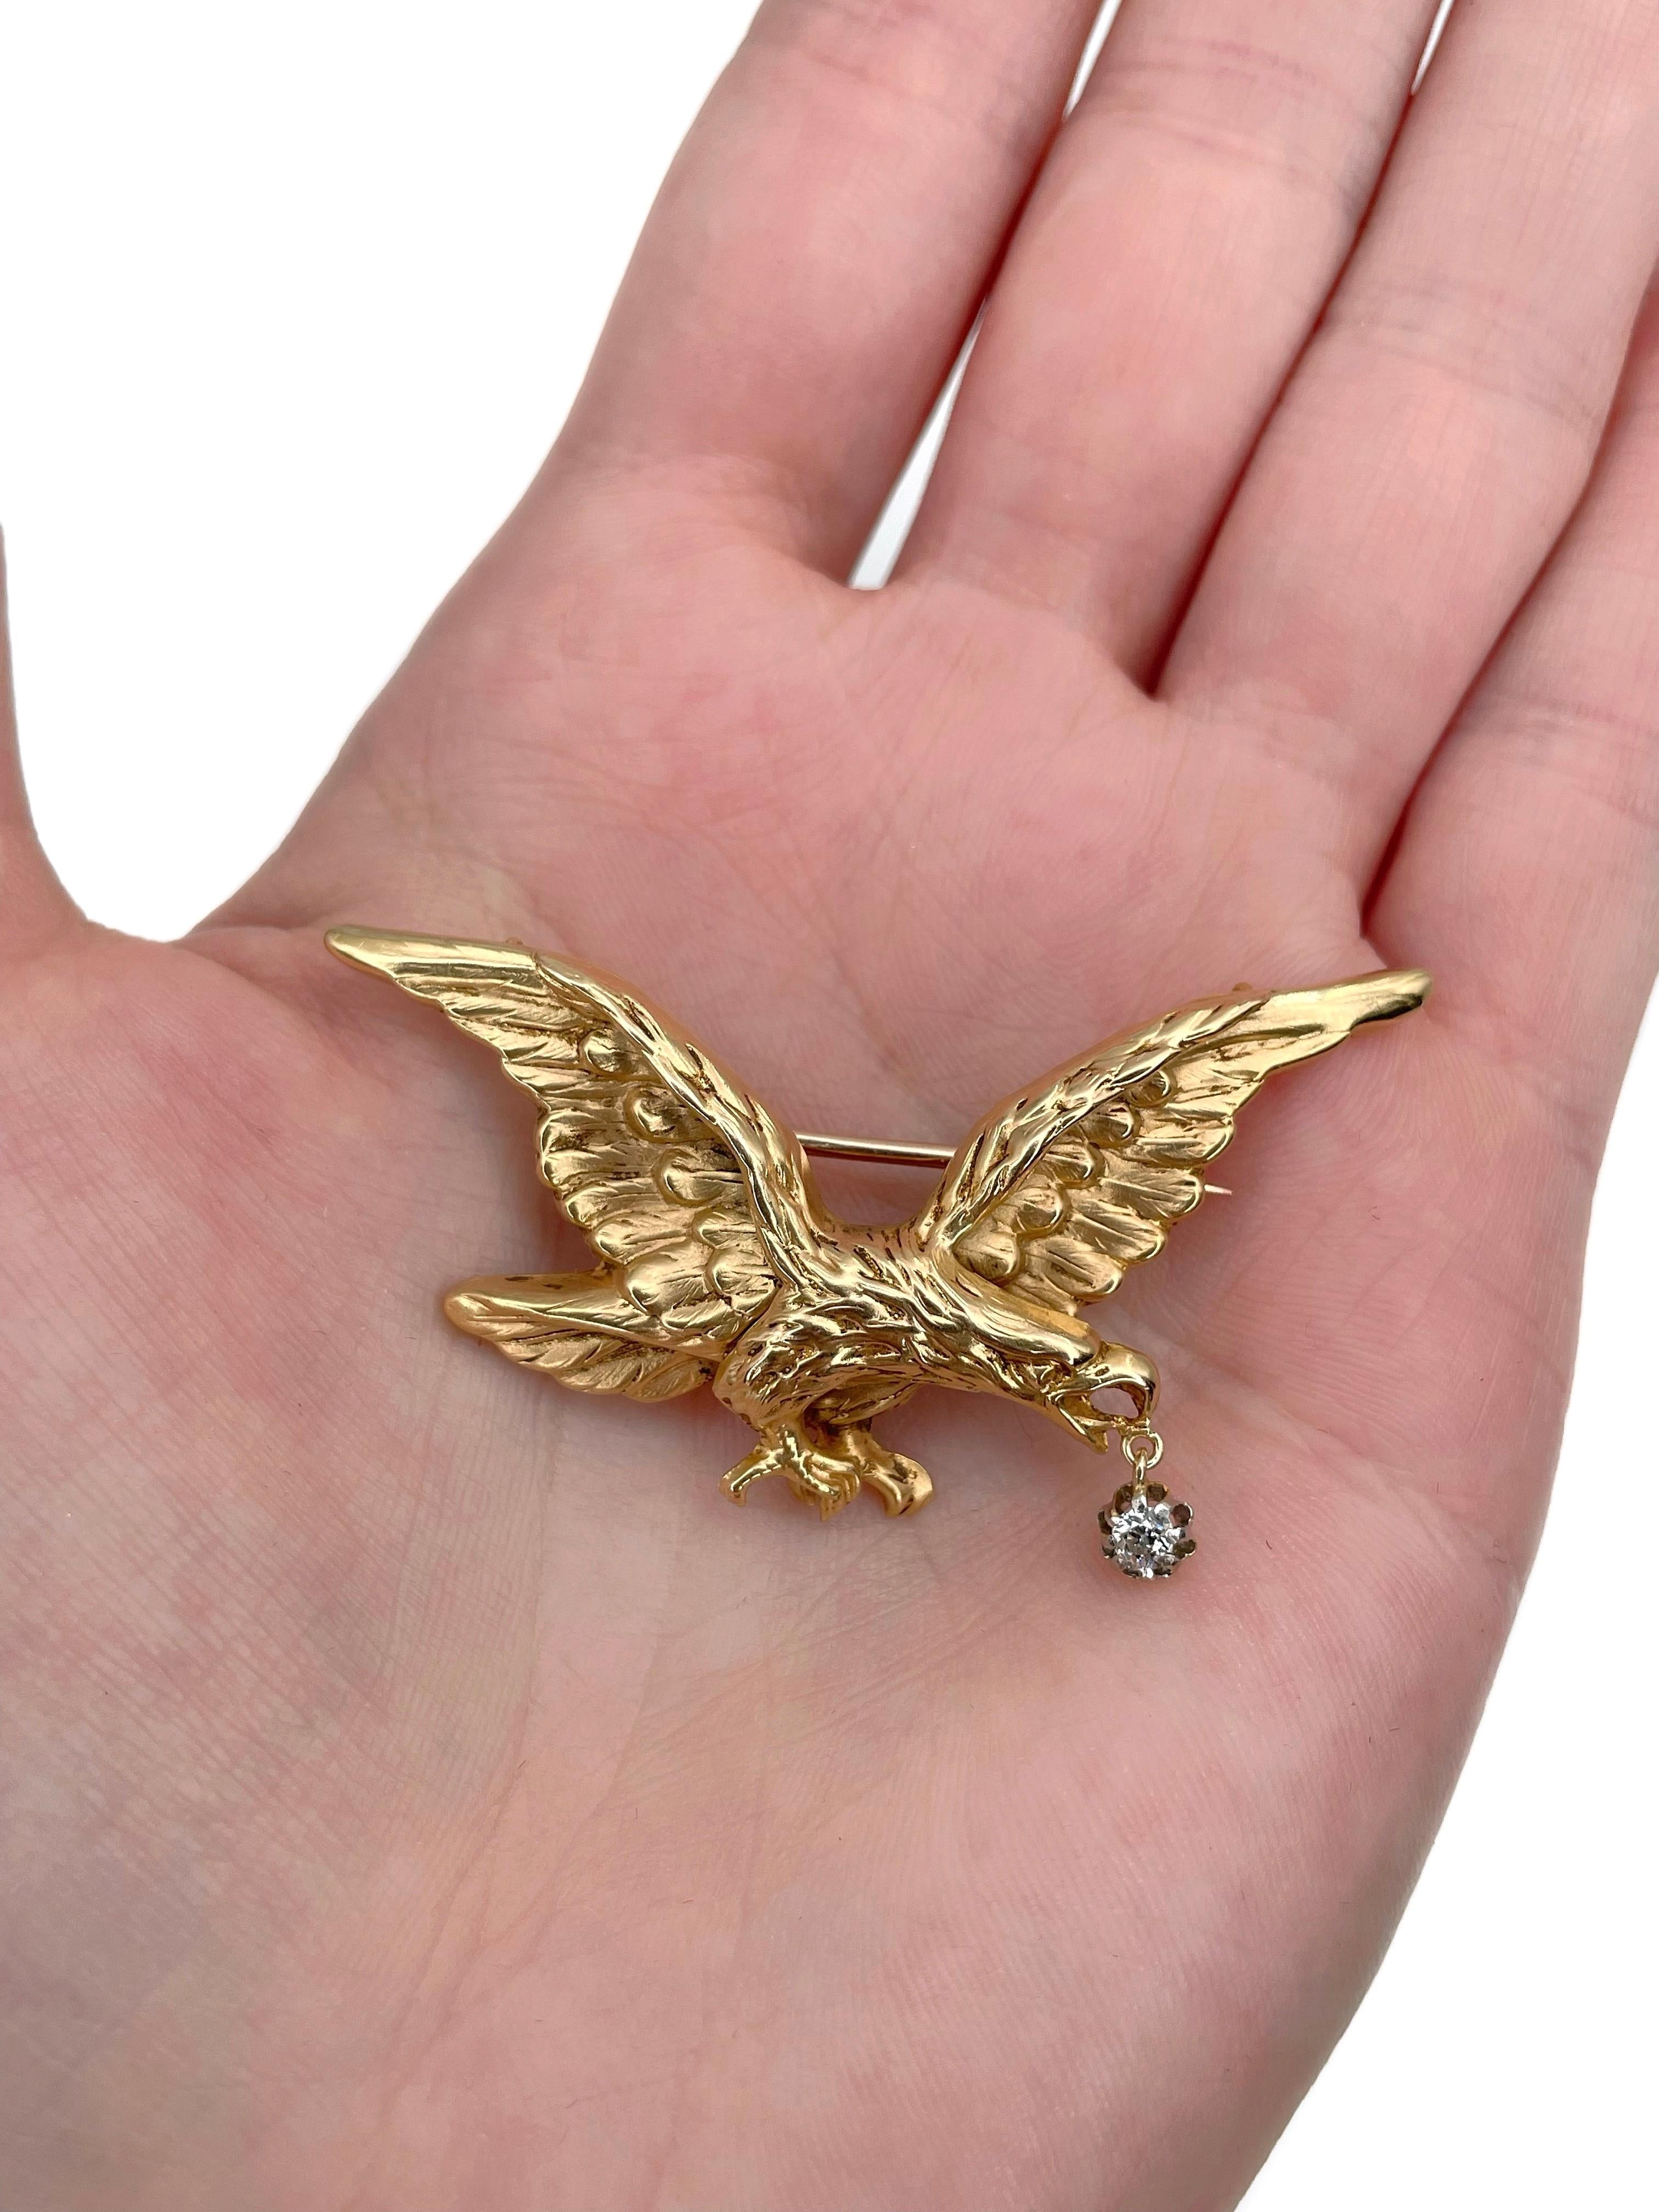 This is a Victorian pin brooch crafted in 18K yellow gold. Circa 1880.

The piece depicts an eagle holding old cut diamond in its beak. 

Has a C clasp. 
There are small rings for a chain. 

Weight: 7.53g
Size: 5.5x3cm

———

If you have any